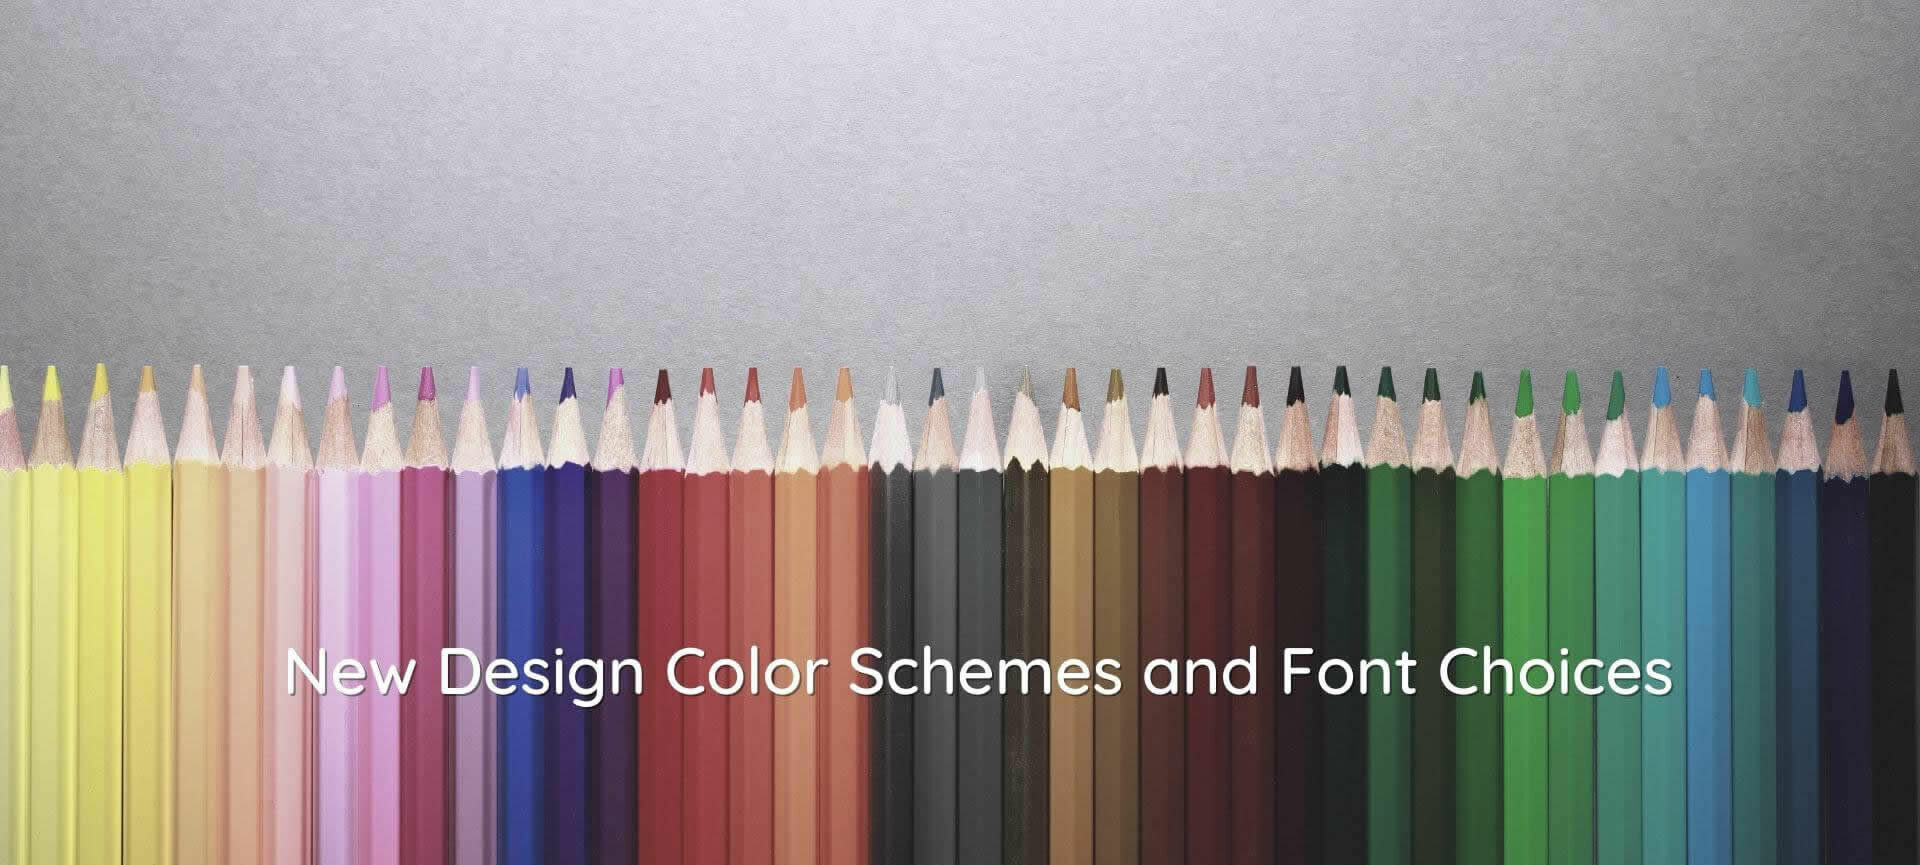 Line of colored pencils, tips up , with text: Color and Font Design Choices